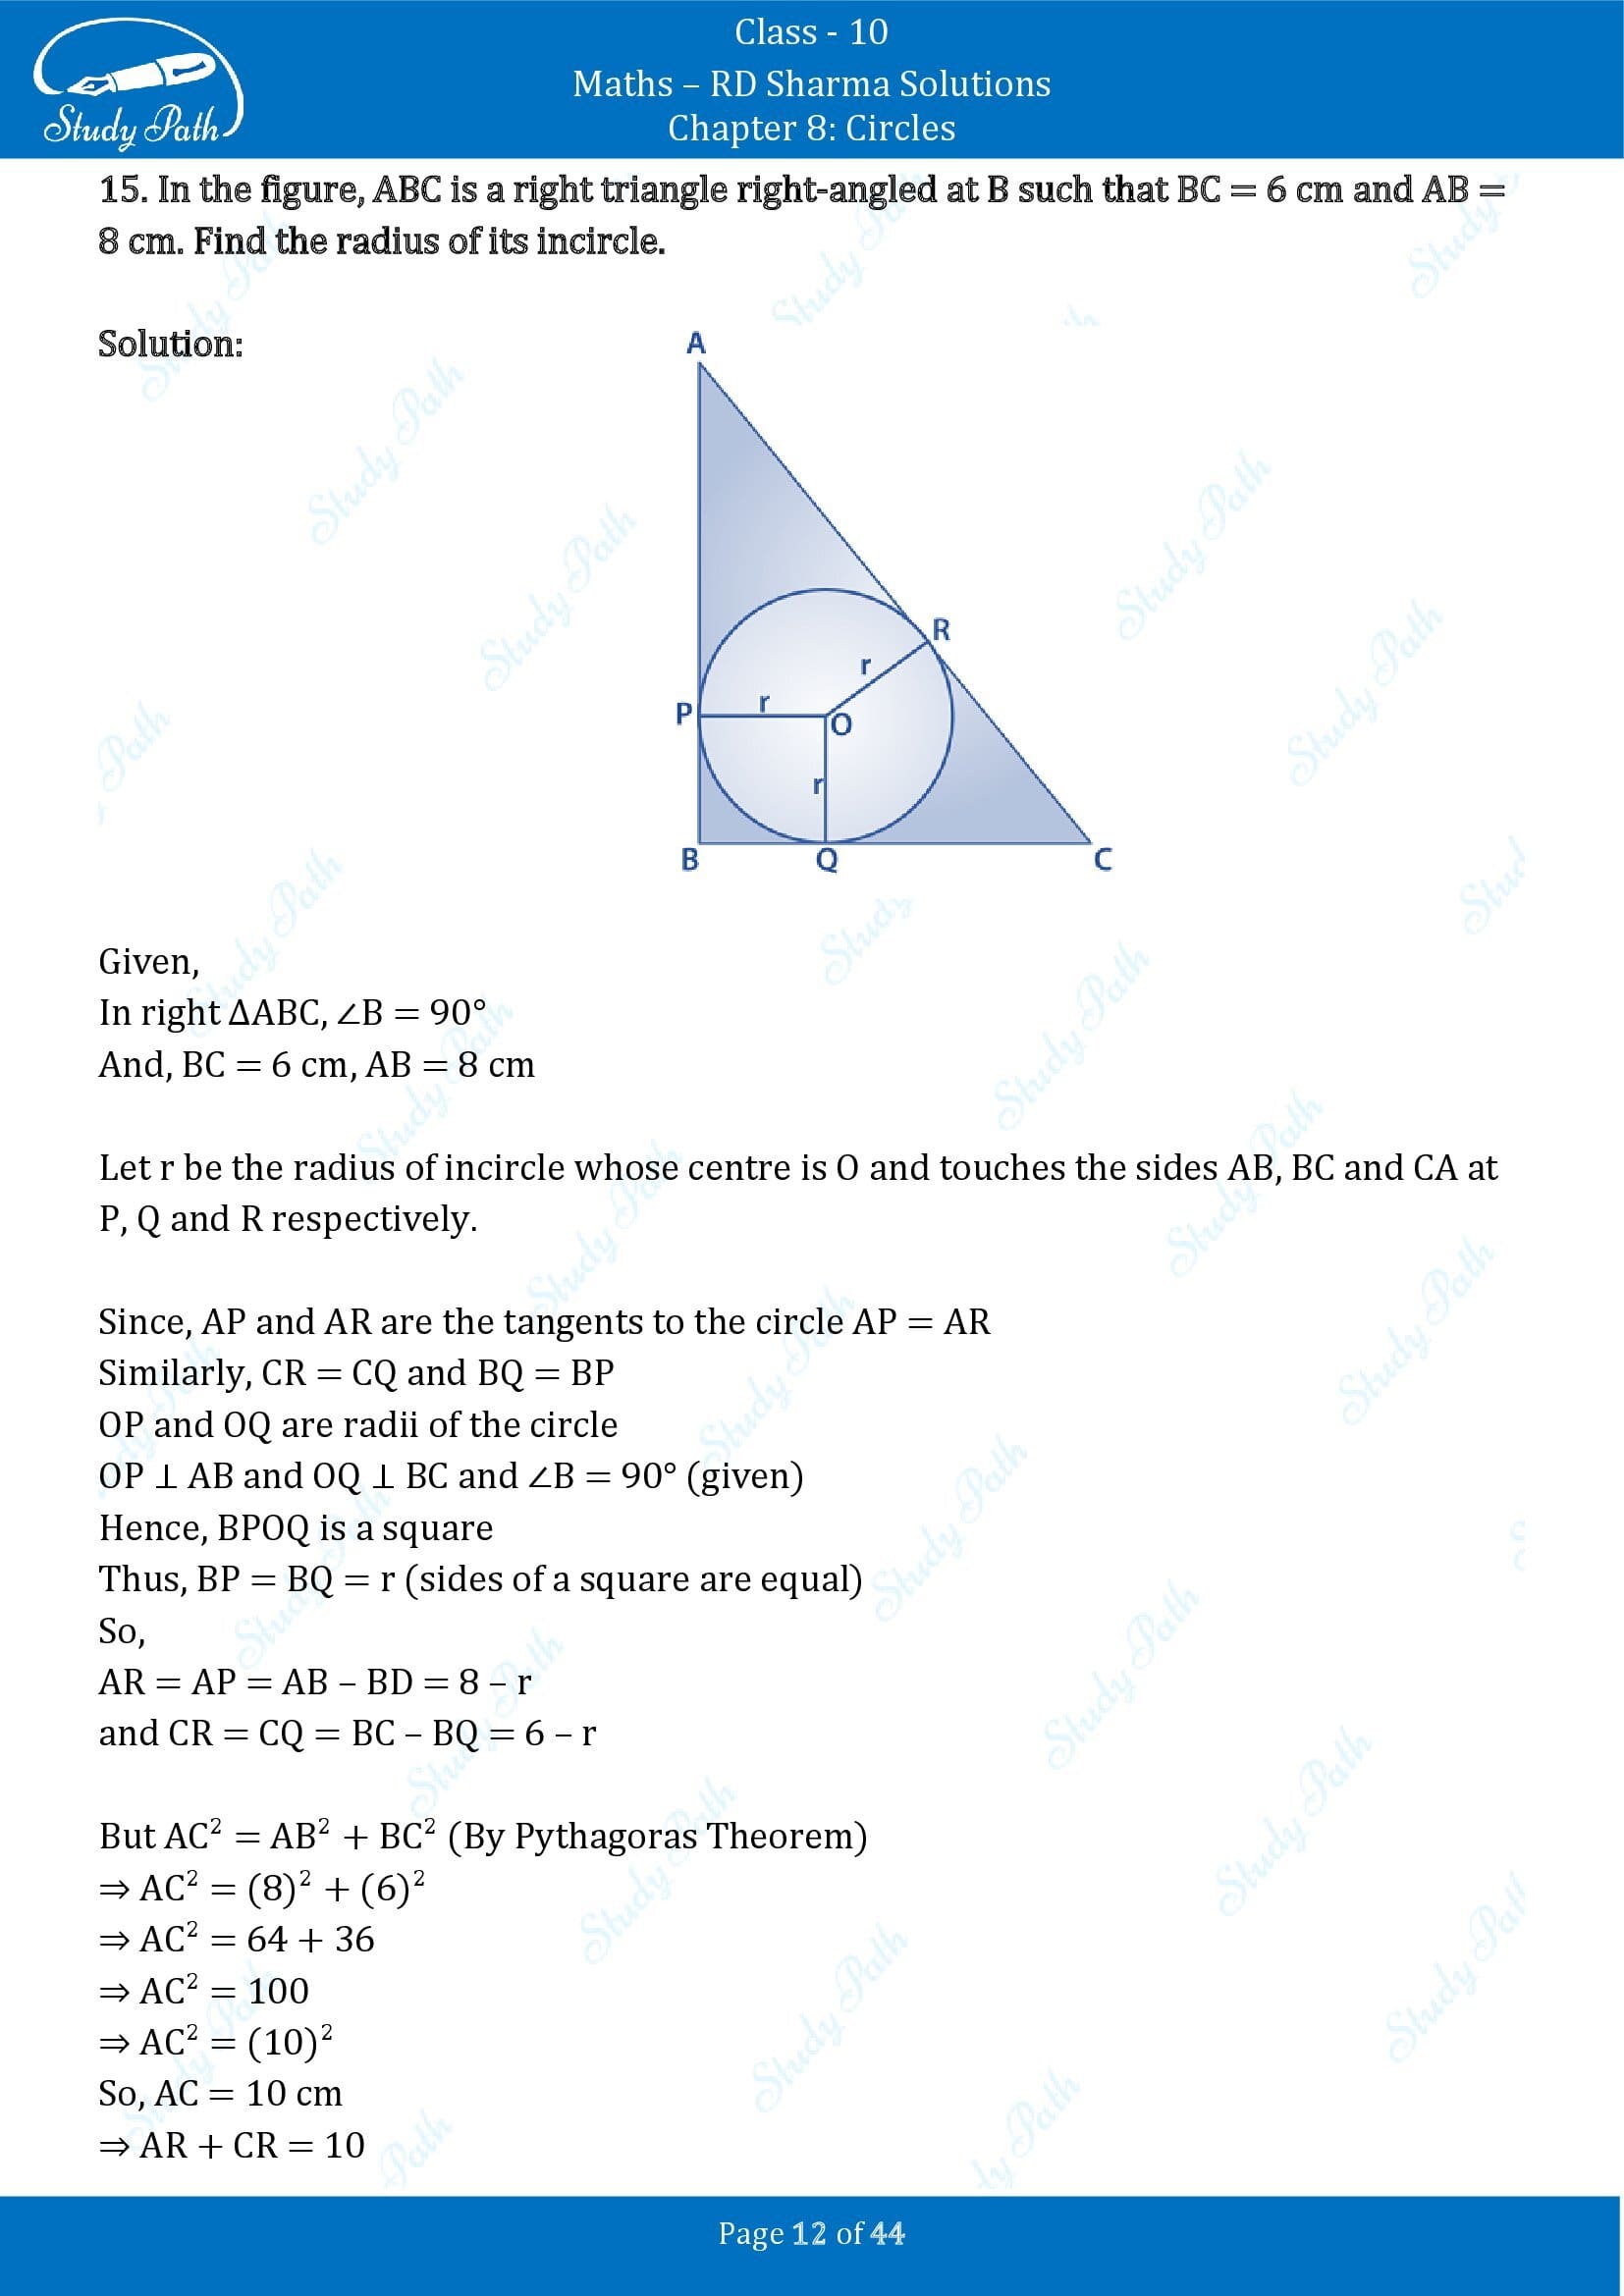 RD Sharma Solutions Class 10 Chapter 8 Circles Exercise 8.2 00012